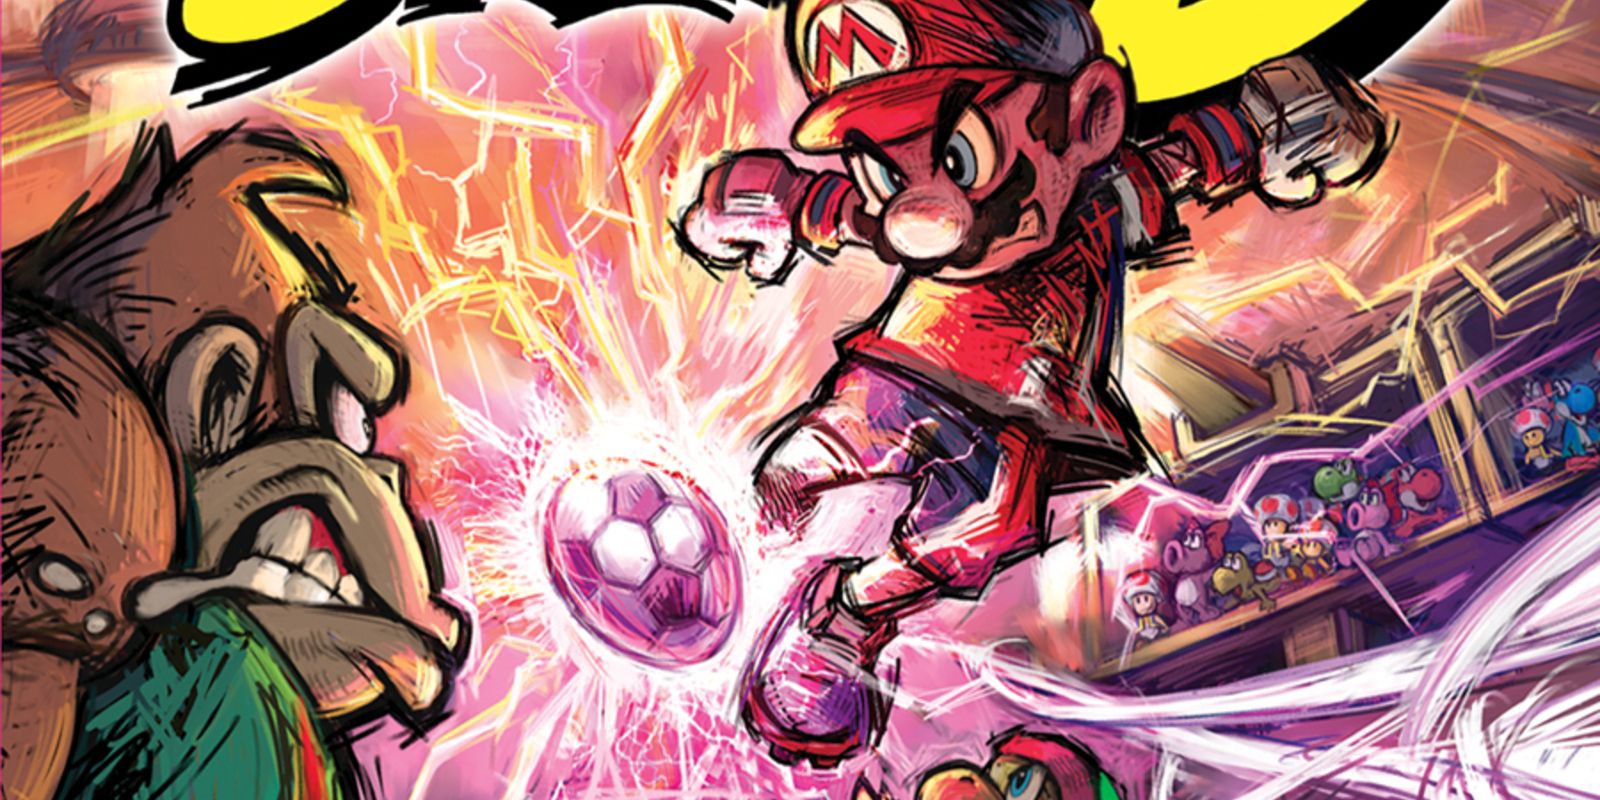 Mario and Donkey Kong matching off in Super Mario Strikers